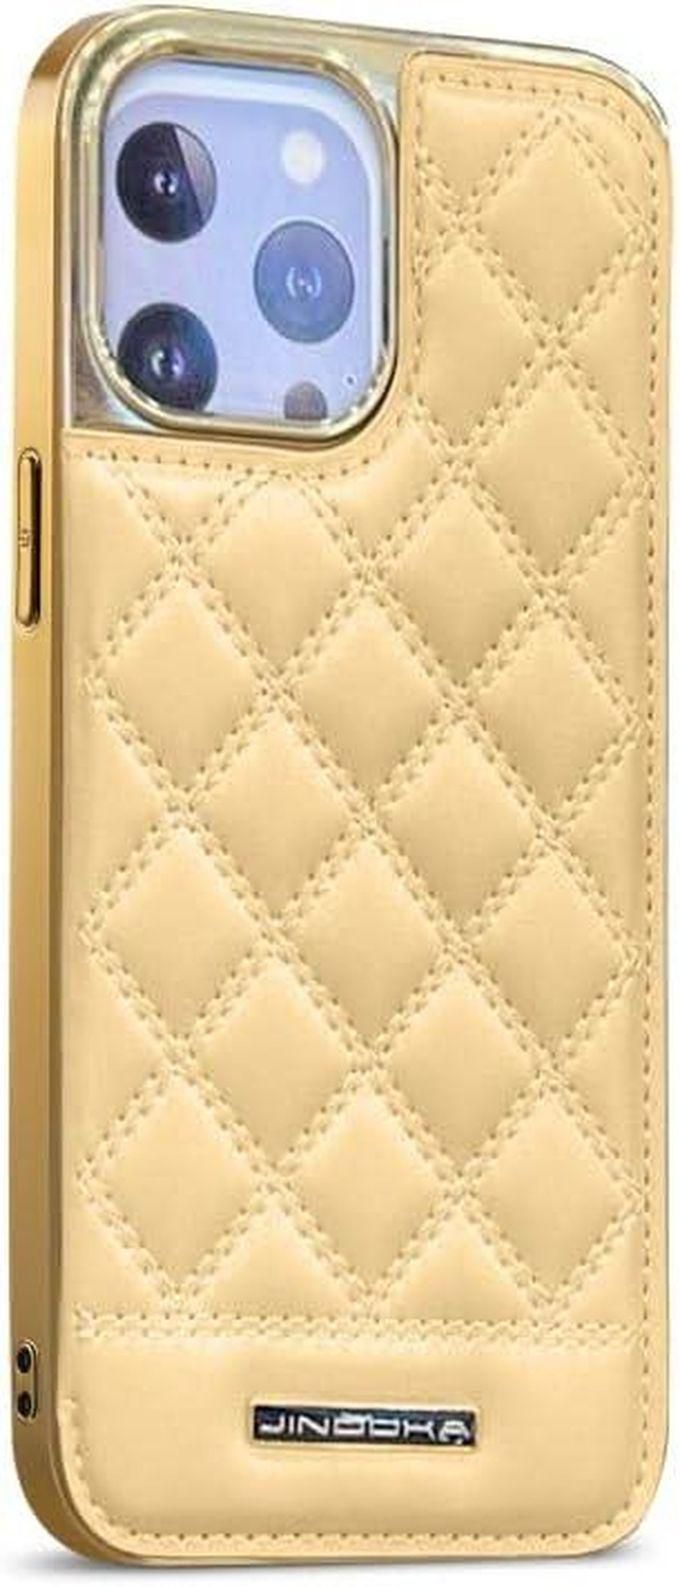 Next store Compatible with iPhone 14 Pro Max Case, (2/1 Kickstand & Card Holder) Embroidery Diamond Pattern Durable Anti-Scratch Shockproof Protective Phone Case (Camel)